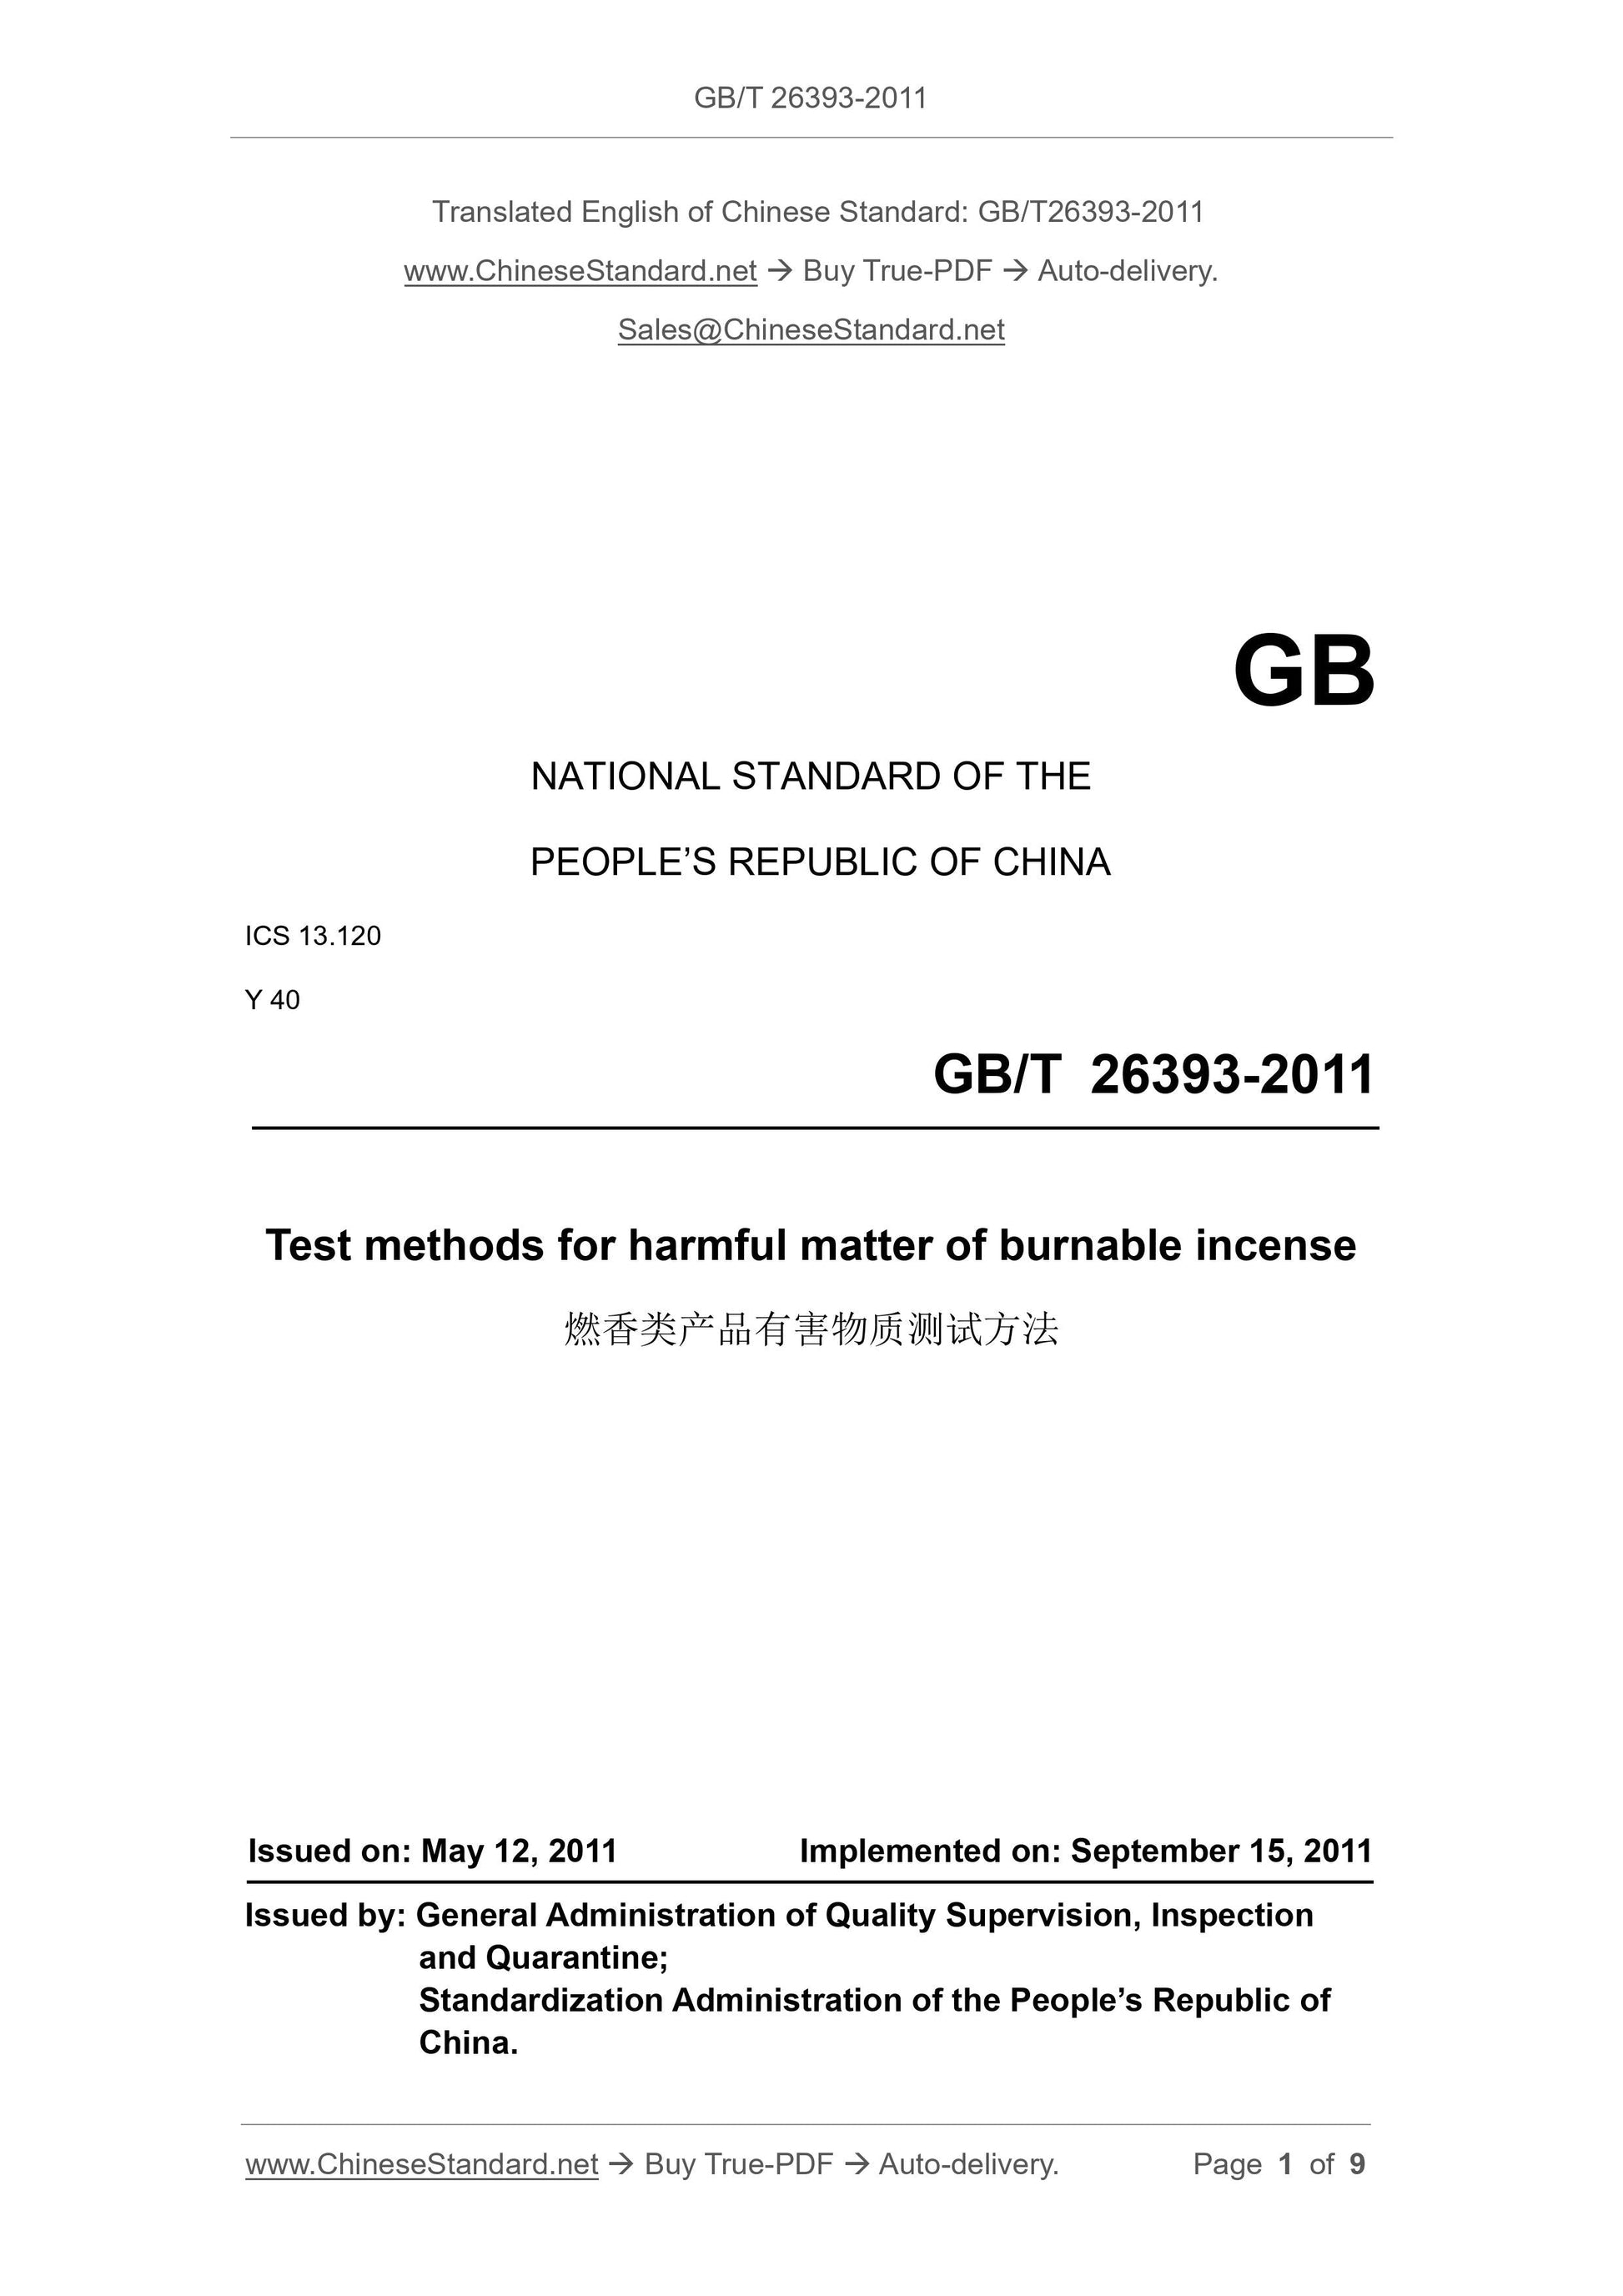 GB/T 26393-2011 Page 1